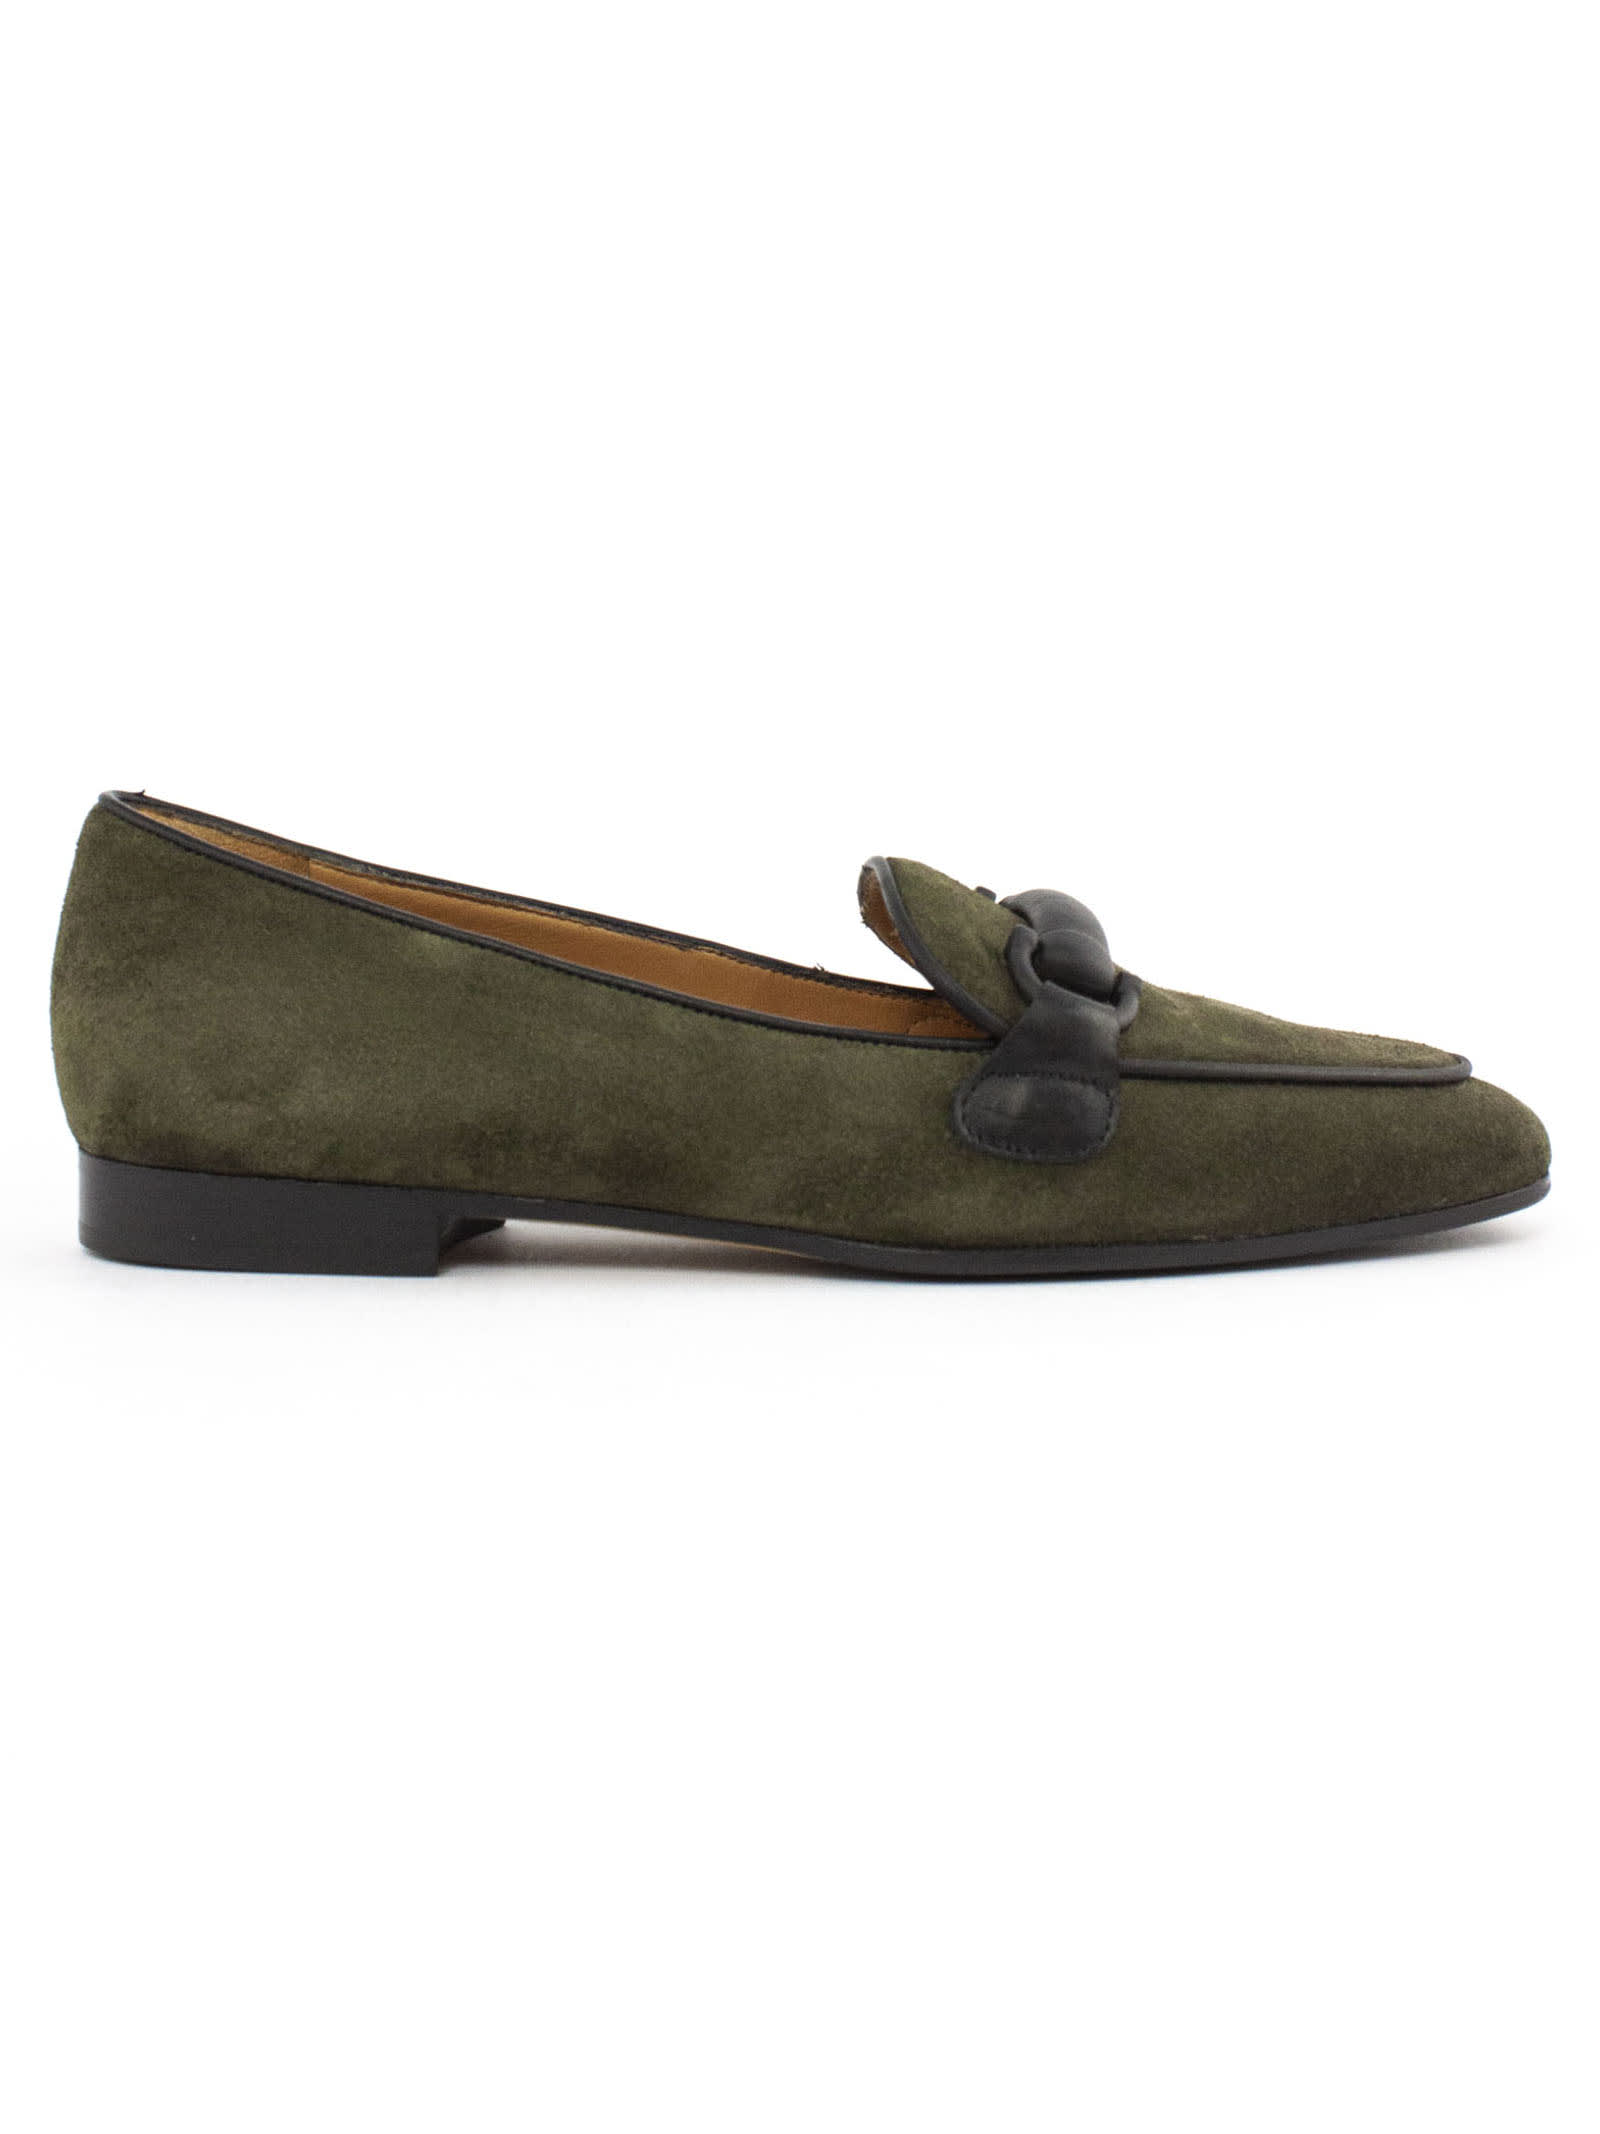 Roberto Festa Angie Green Suede Loafer